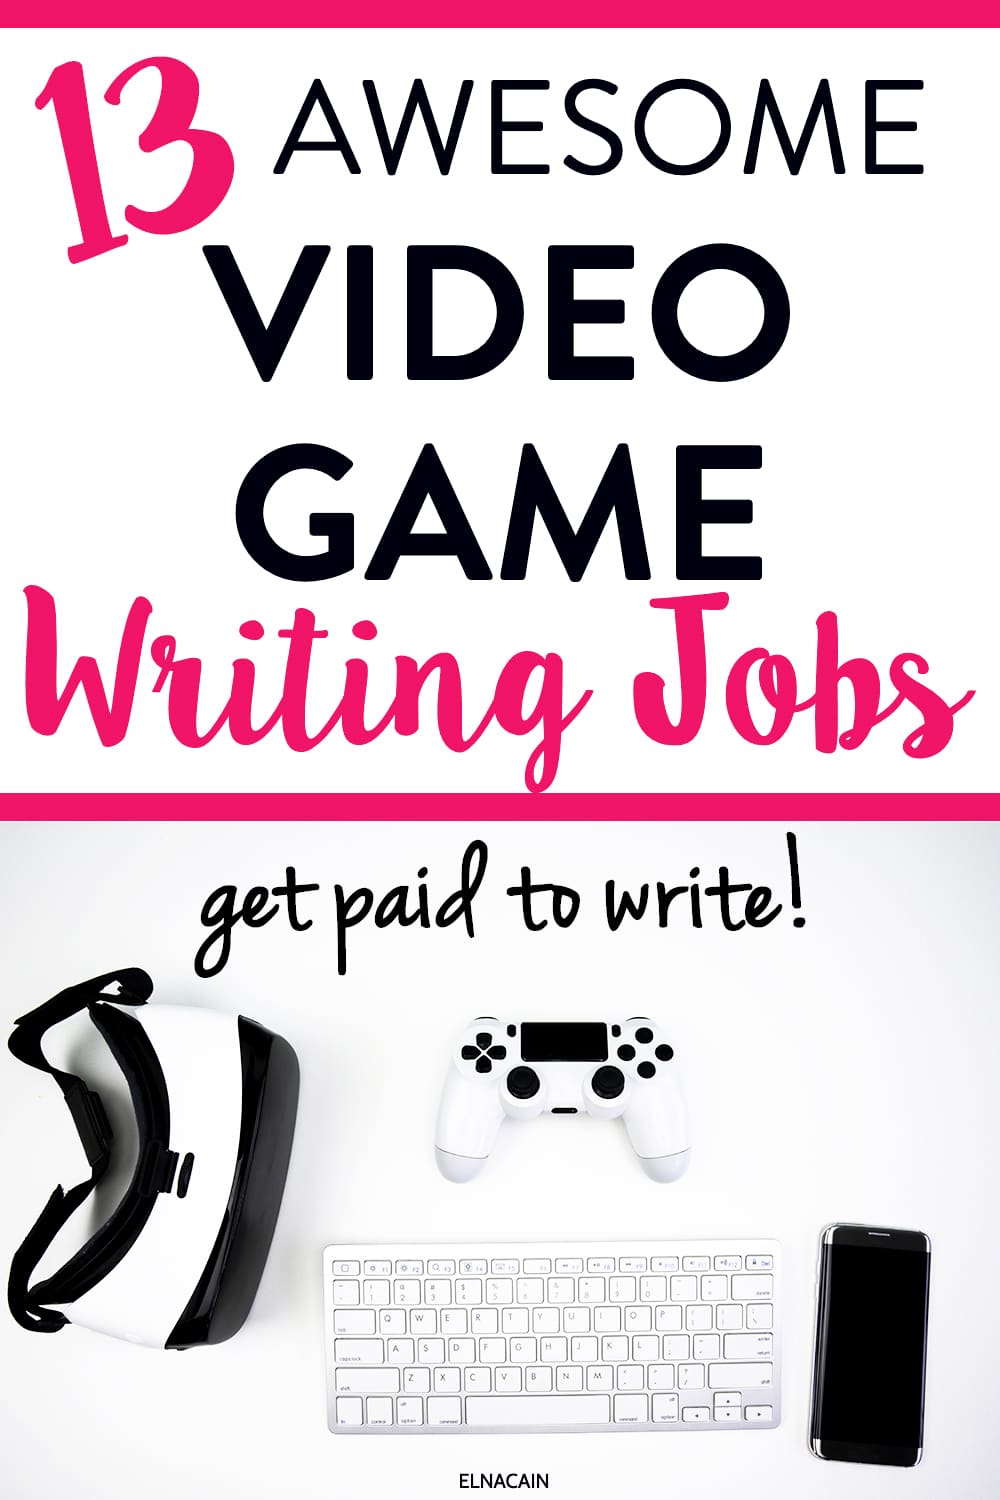 29 video game writers ideas